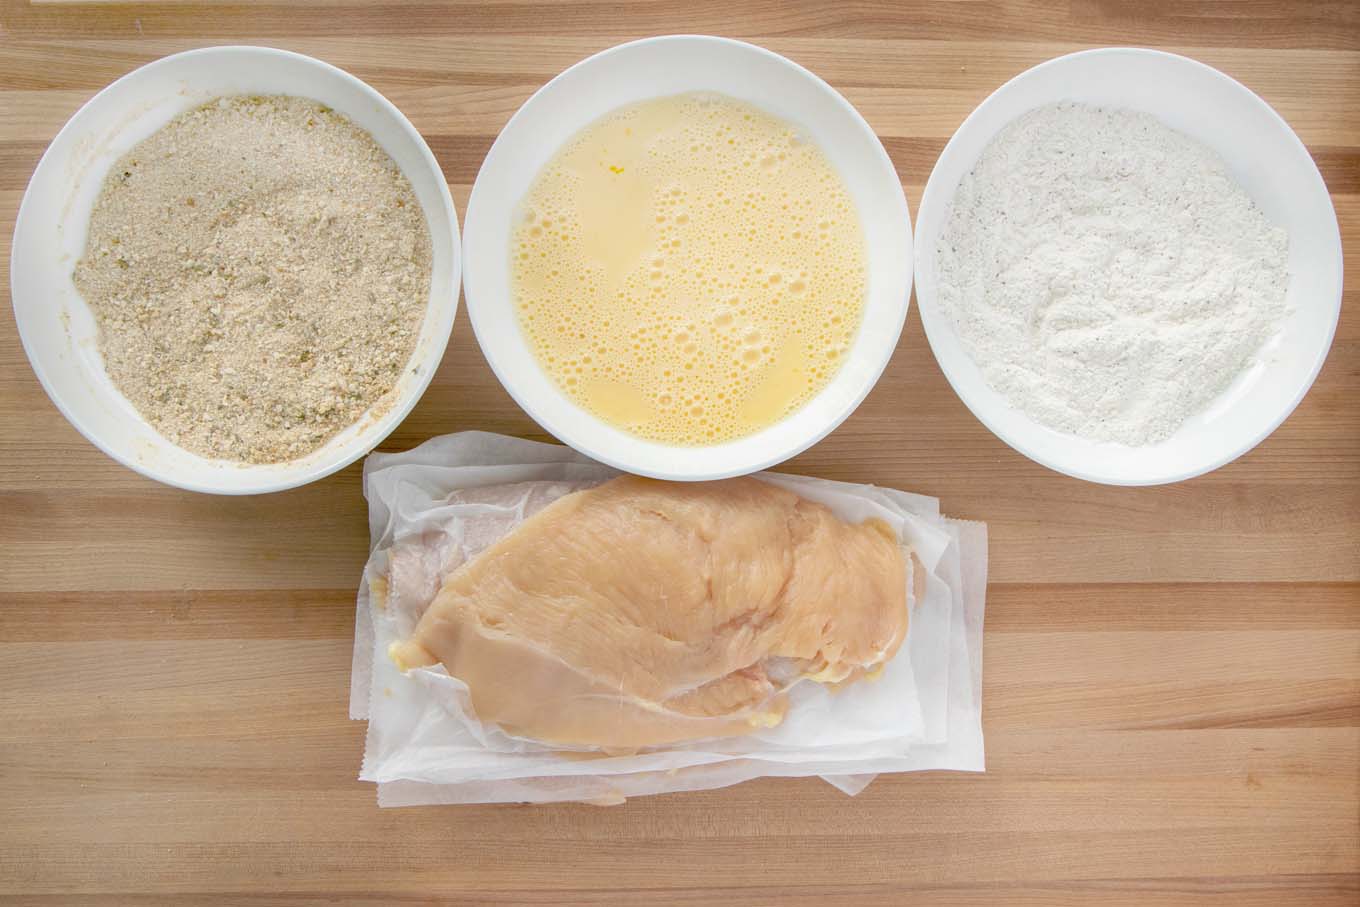 ingredients to make a breaded chicken cutlet